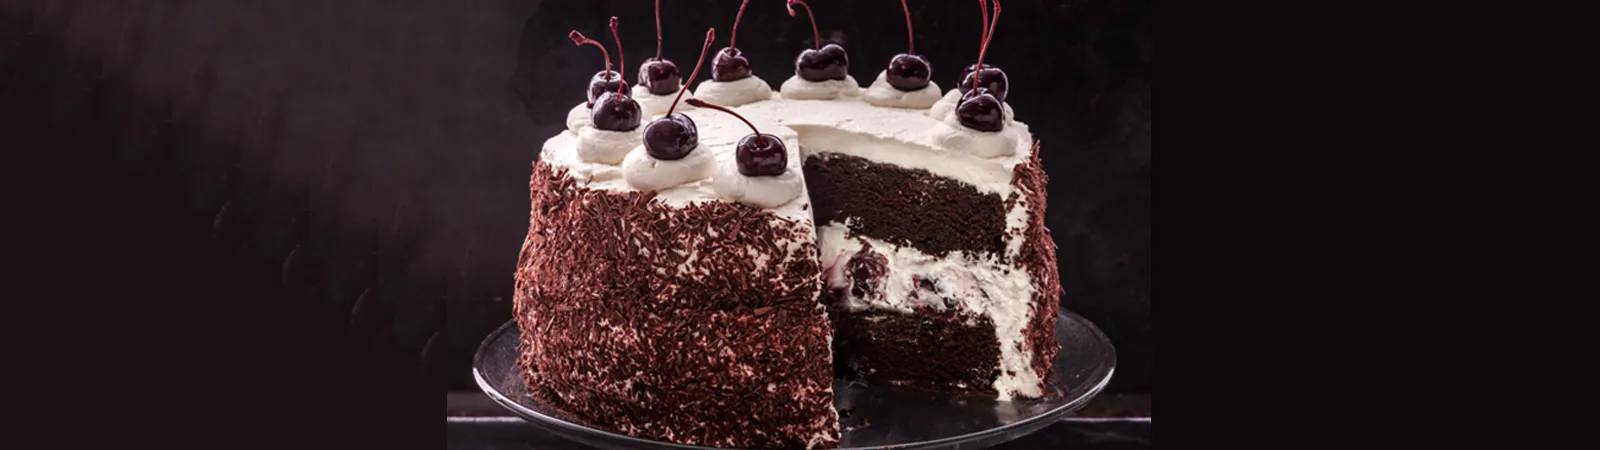 Black Forest Cake, Germany re sized image